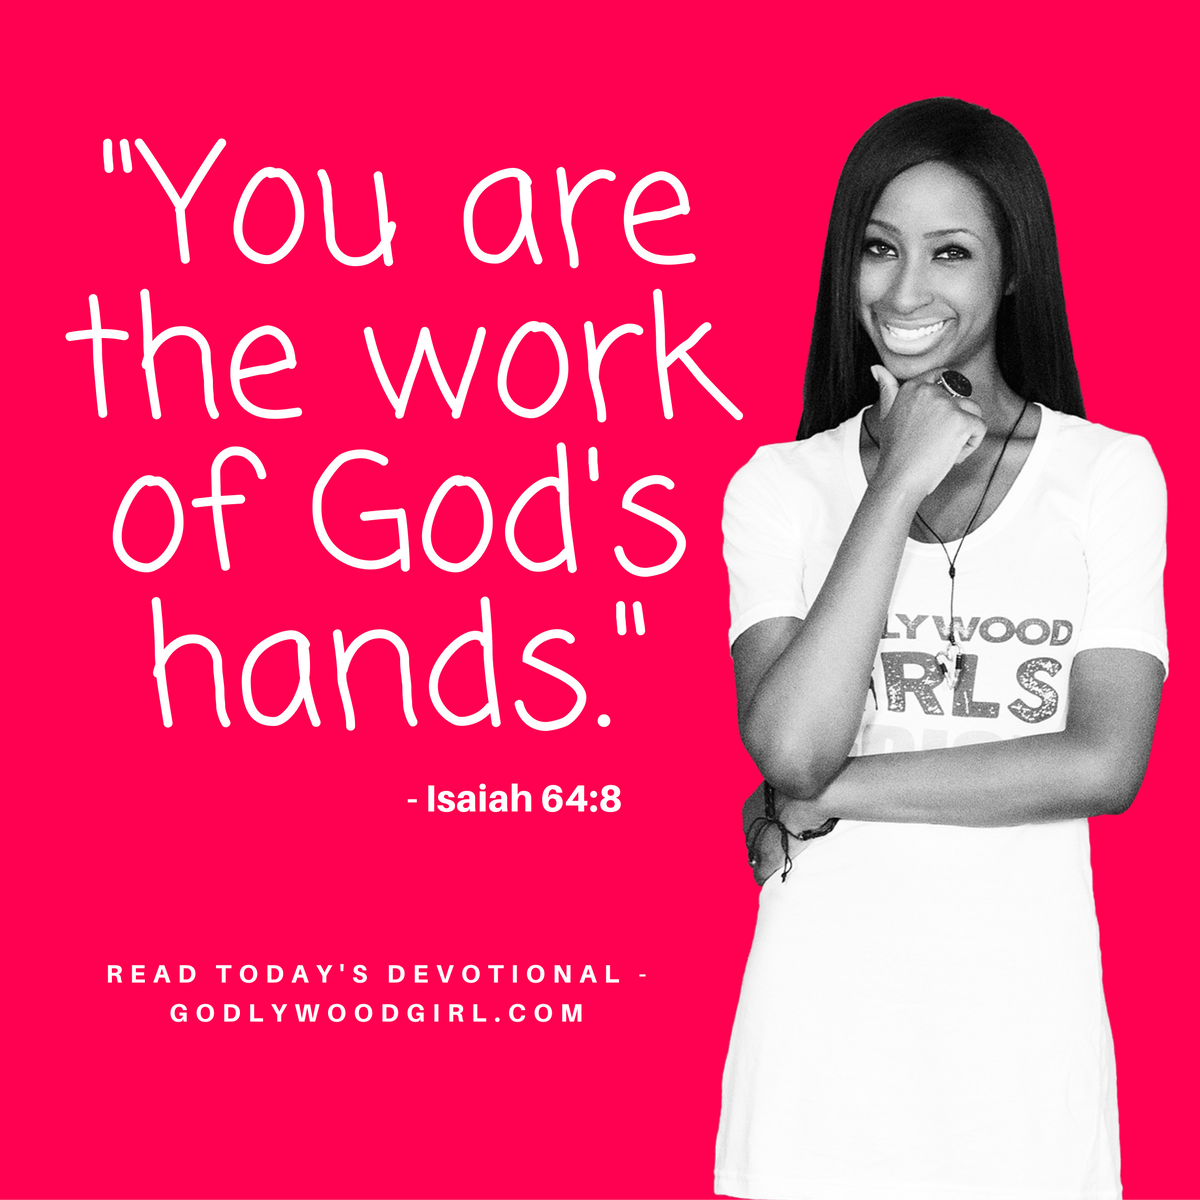 Today's Daily Devotional For Women - You are the work of God’s hand.